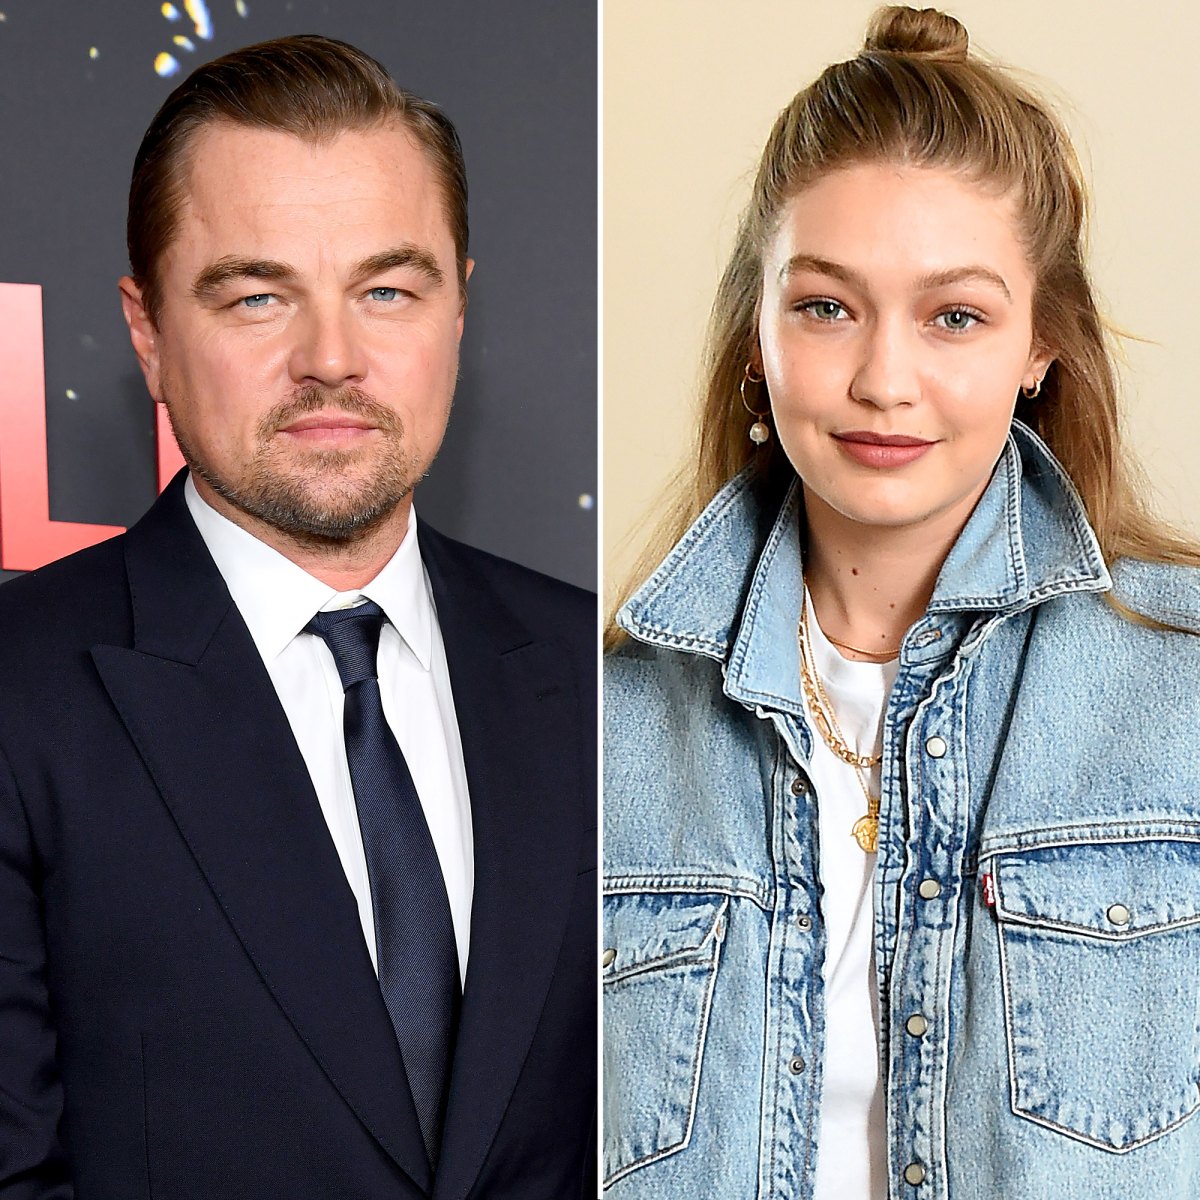 Inside Leonardo DiCaprio and Gigi Hadid's 'Friendly' Relationship After Their Flirt: 'They're Still in Touch'